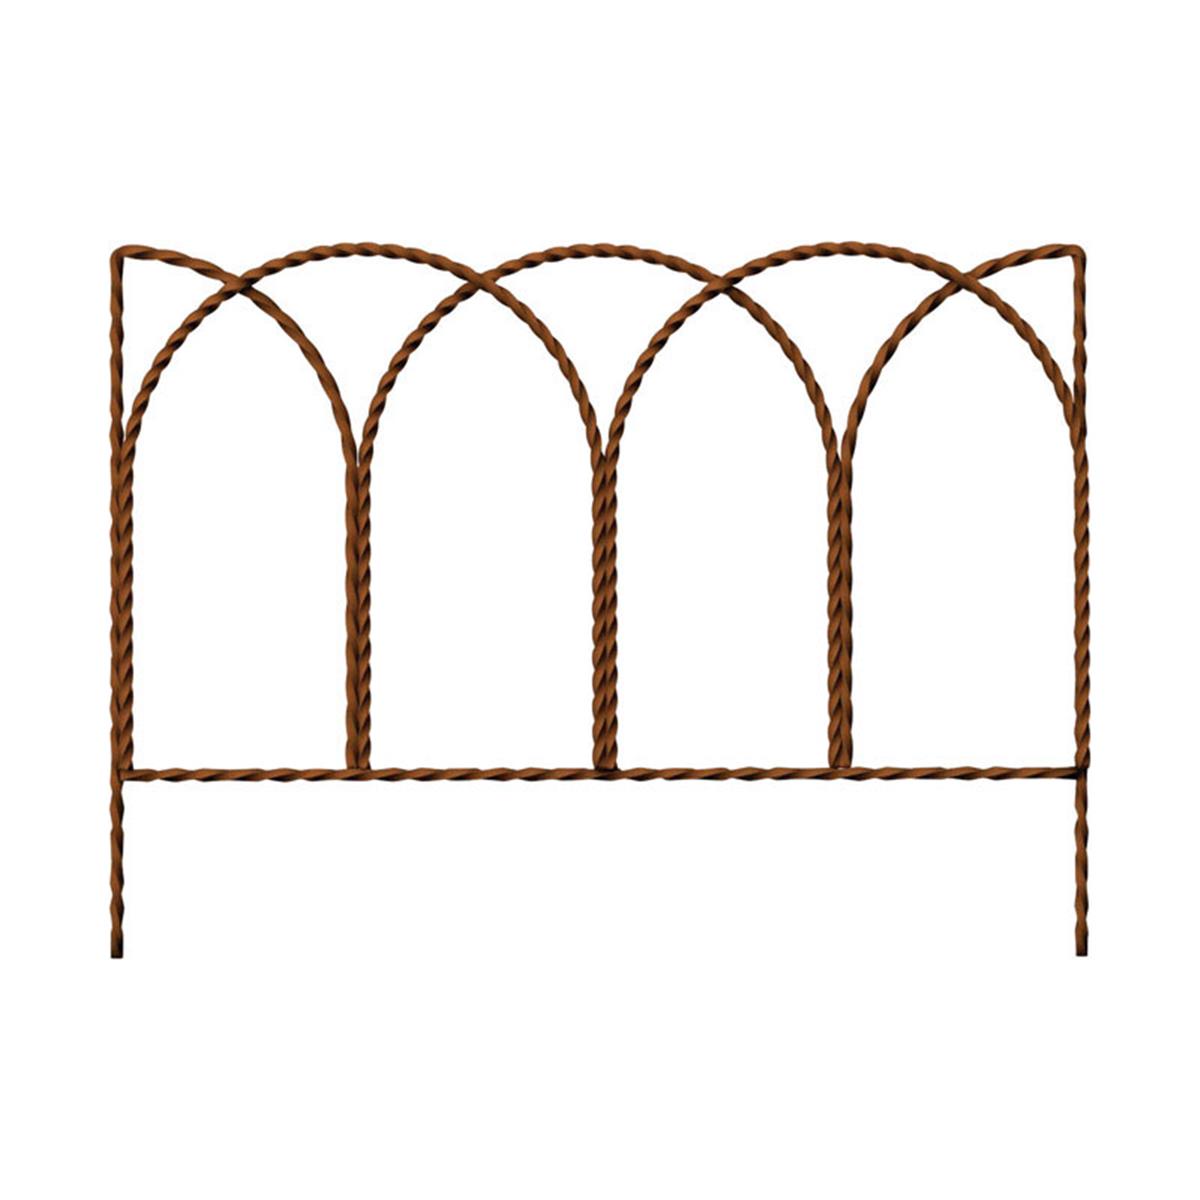 Products 89362 14 X 20 In. Barder Edge Rustic- Pack Of 12